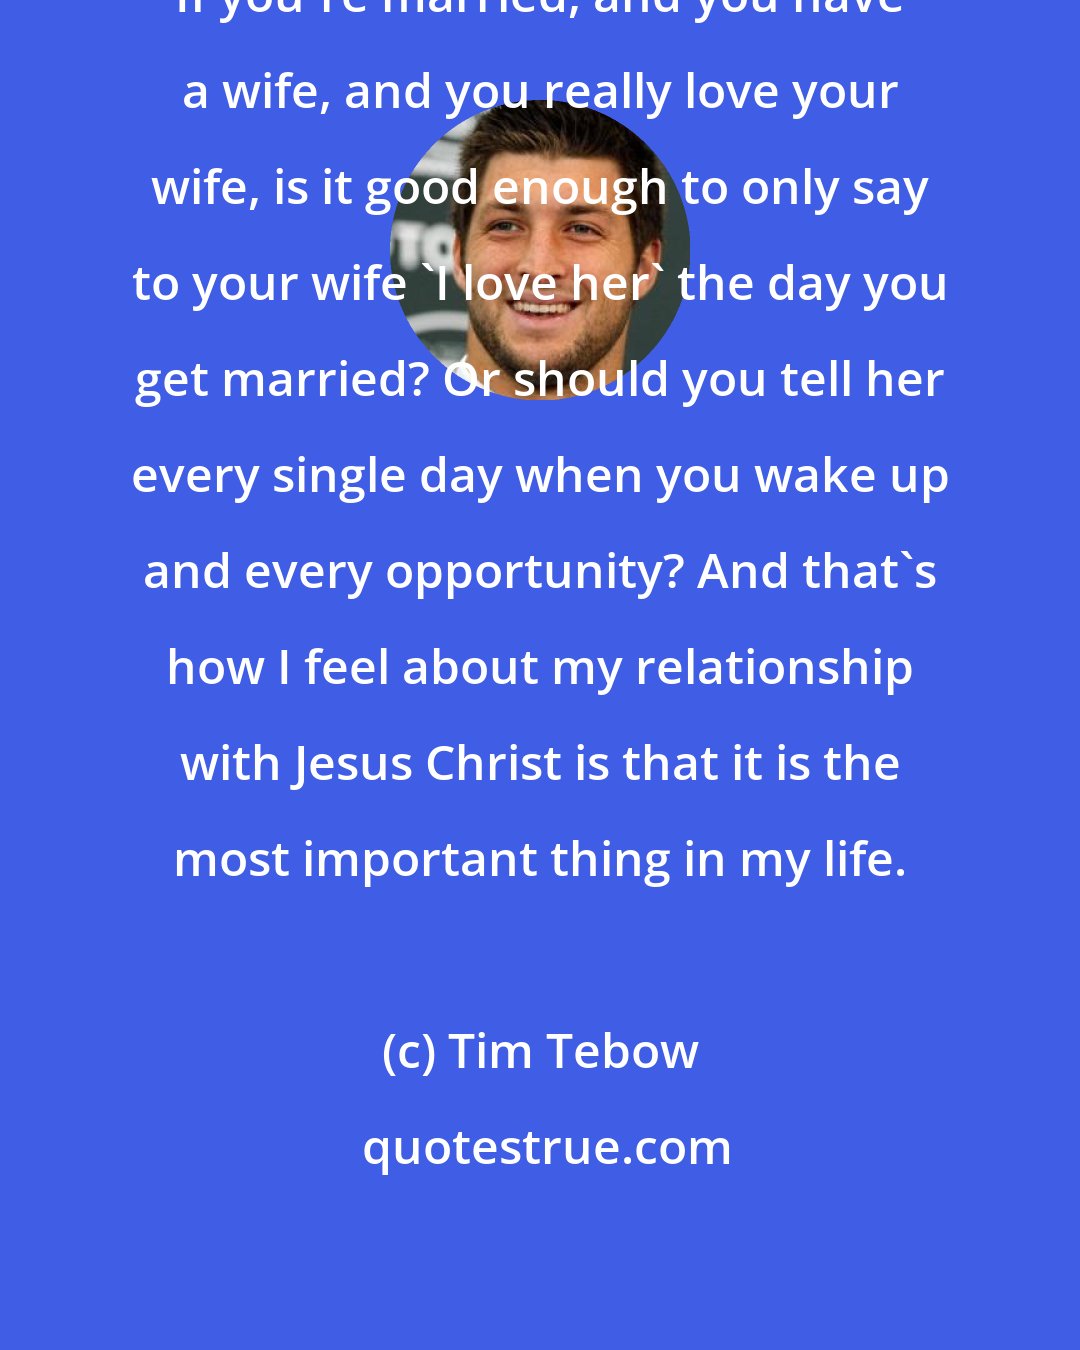 Tim Tebow: If you're married, and you have a wife, and you really love your wife, is it good enough to only say to your wife 'I love her' the day you get married? Or should you tell her every single day when you wake up and every opportunity? And that's how I feel about my relationship with Jesus Christ is that it is the most important thing in my life.